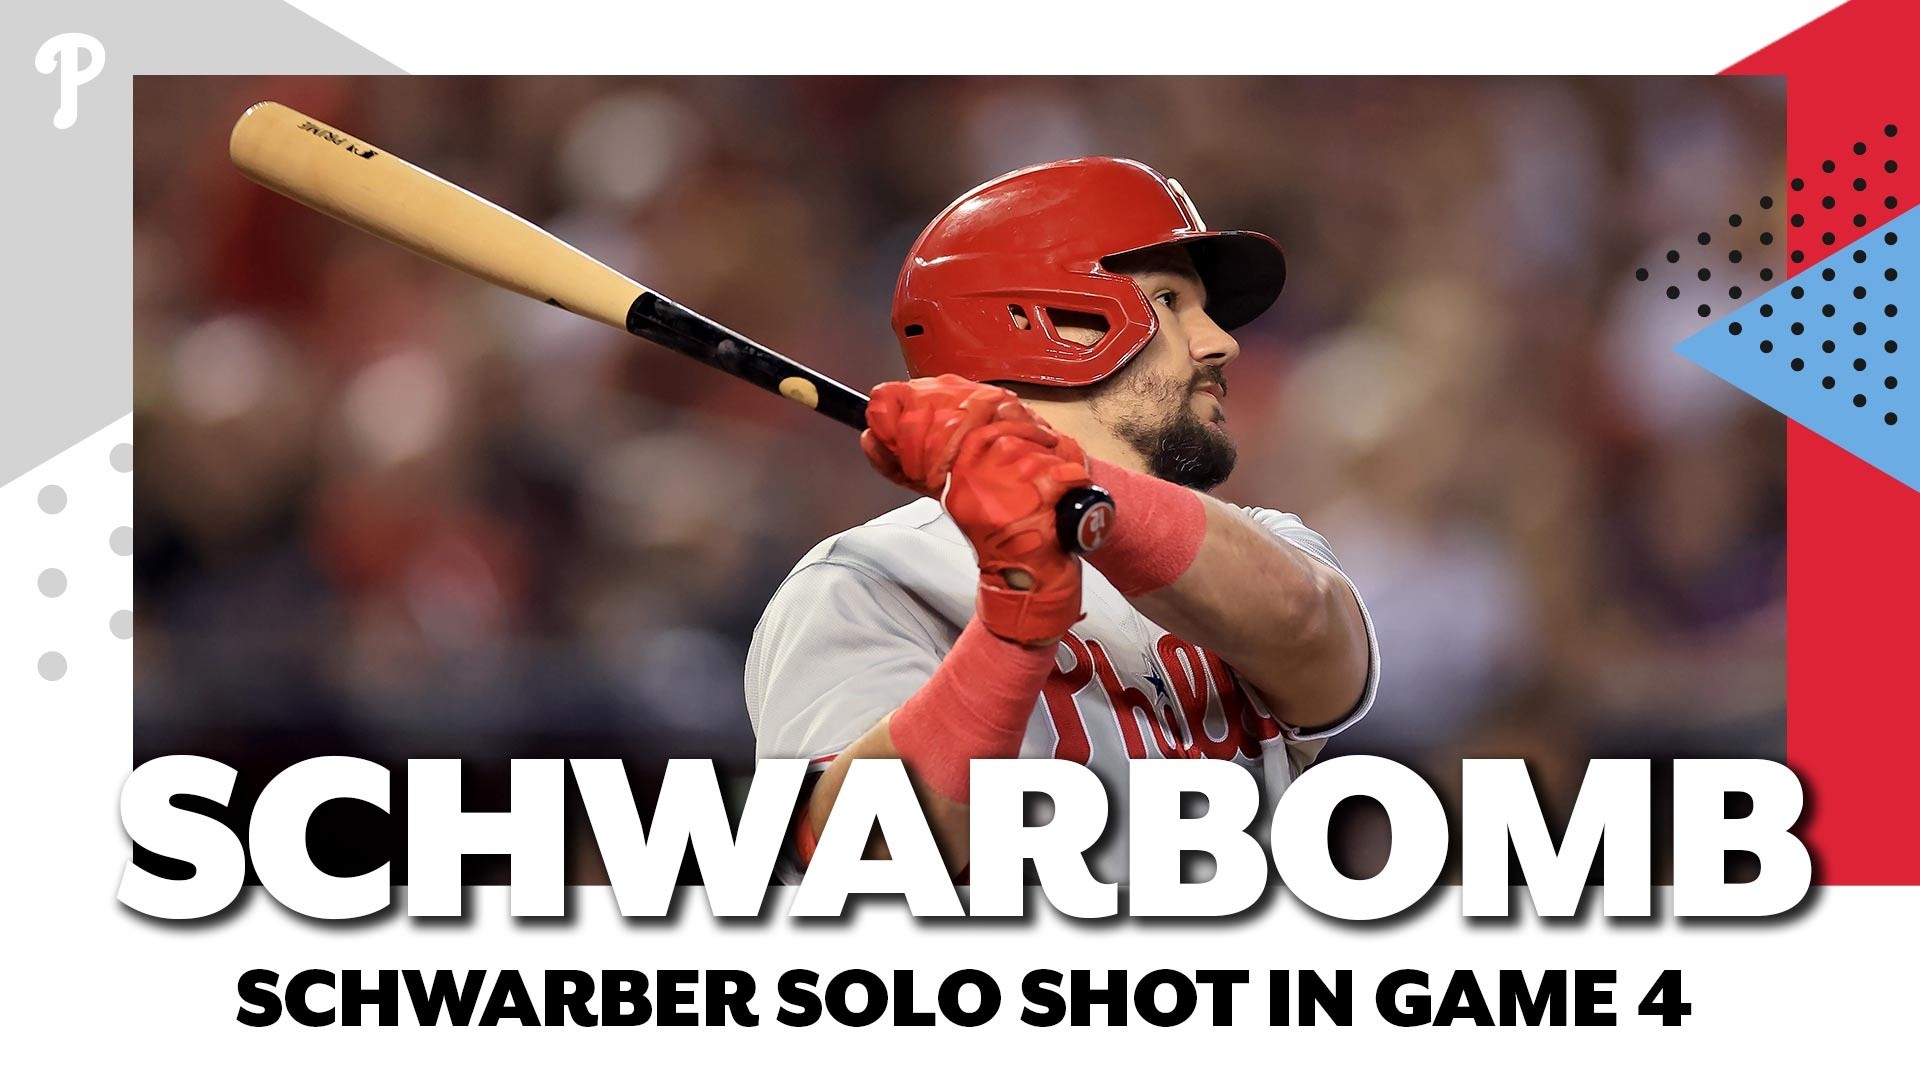 Kyle Schwarber blasts into Phillies' record books with Atlanta moonshot